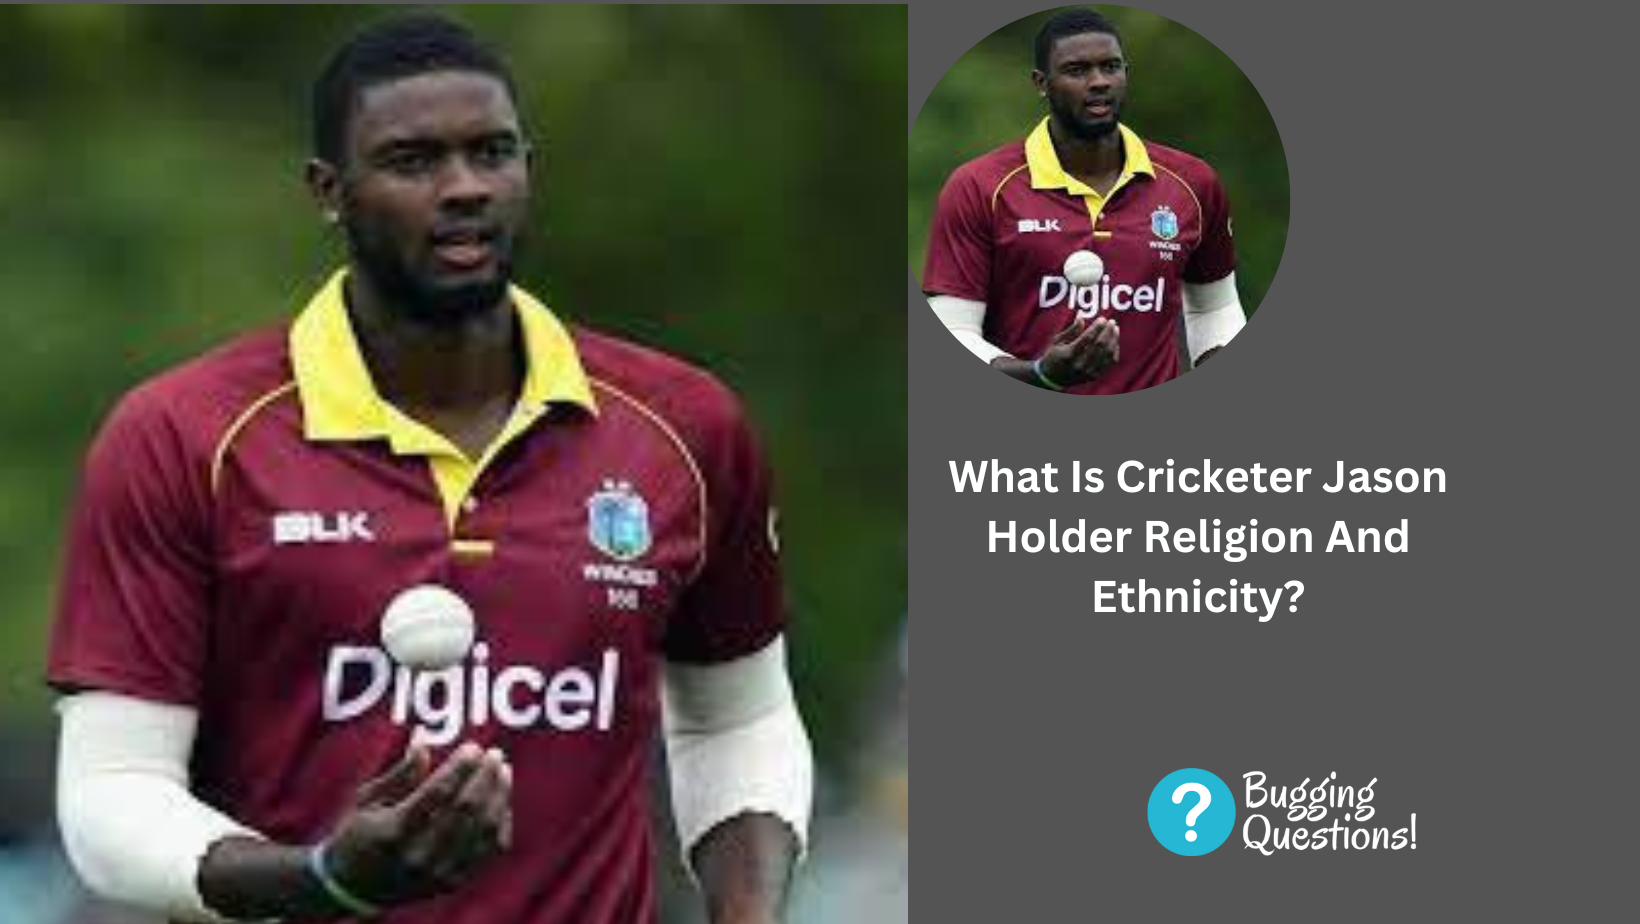 What Is Cricketer Jason Holder Religion And Ethnicity?